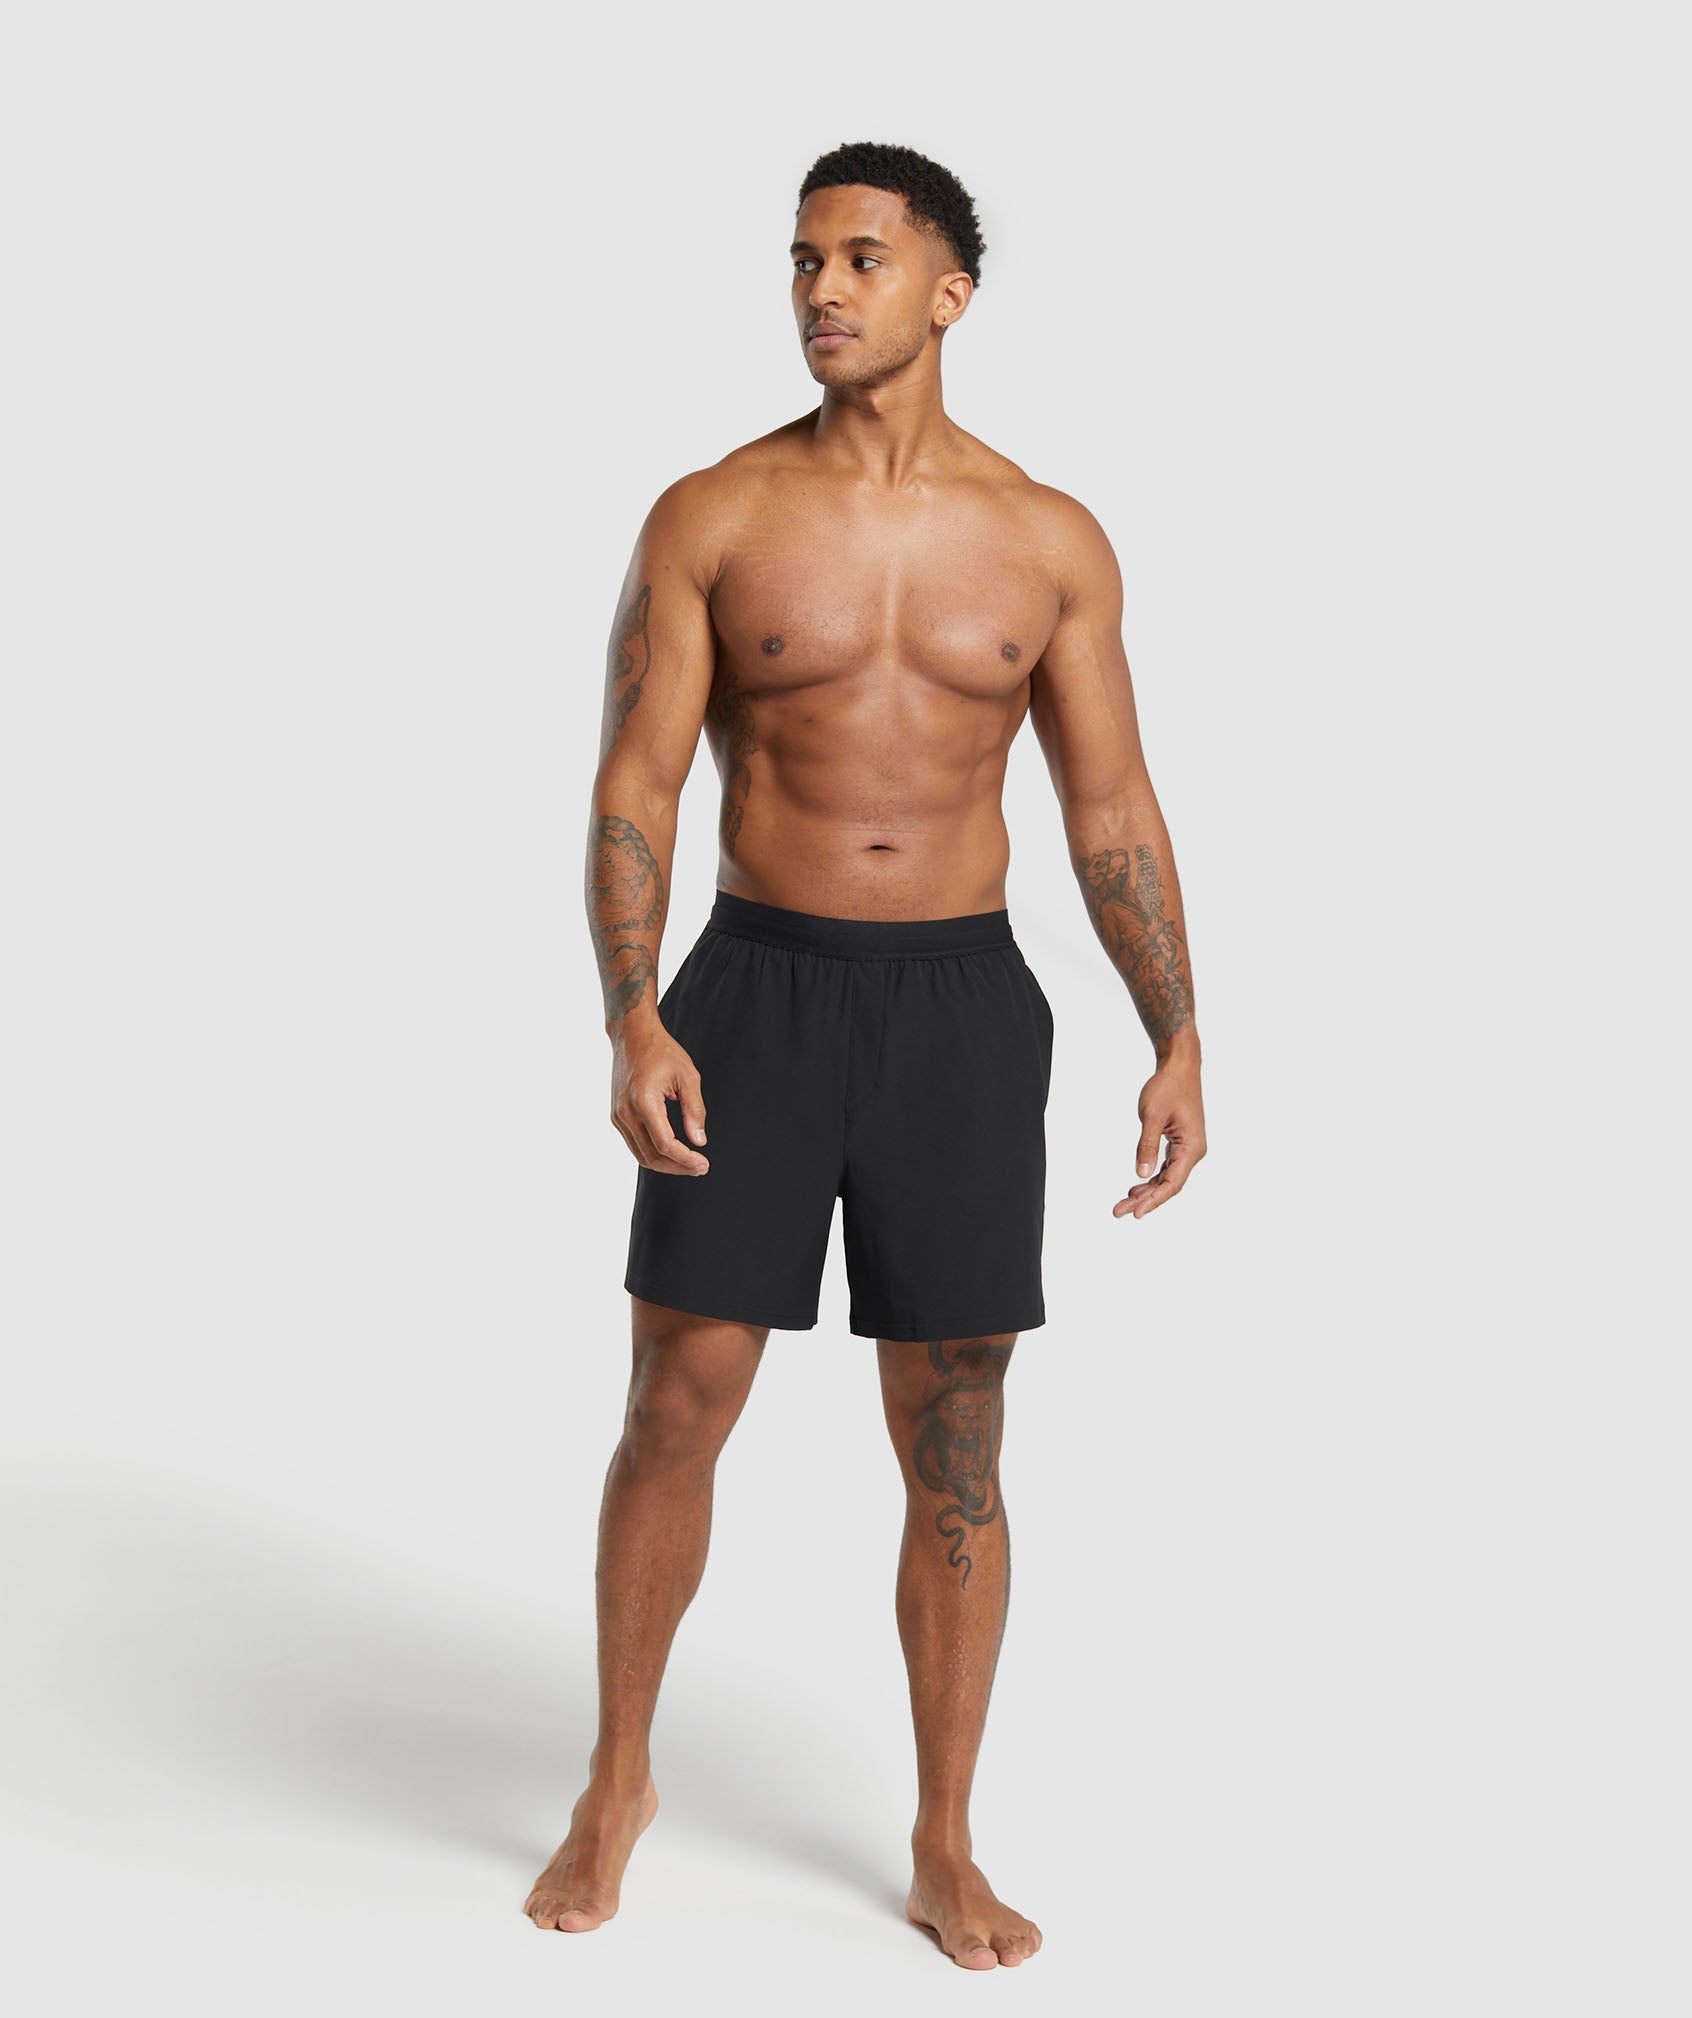 Land to Water 6" Shorts in Black - view 5